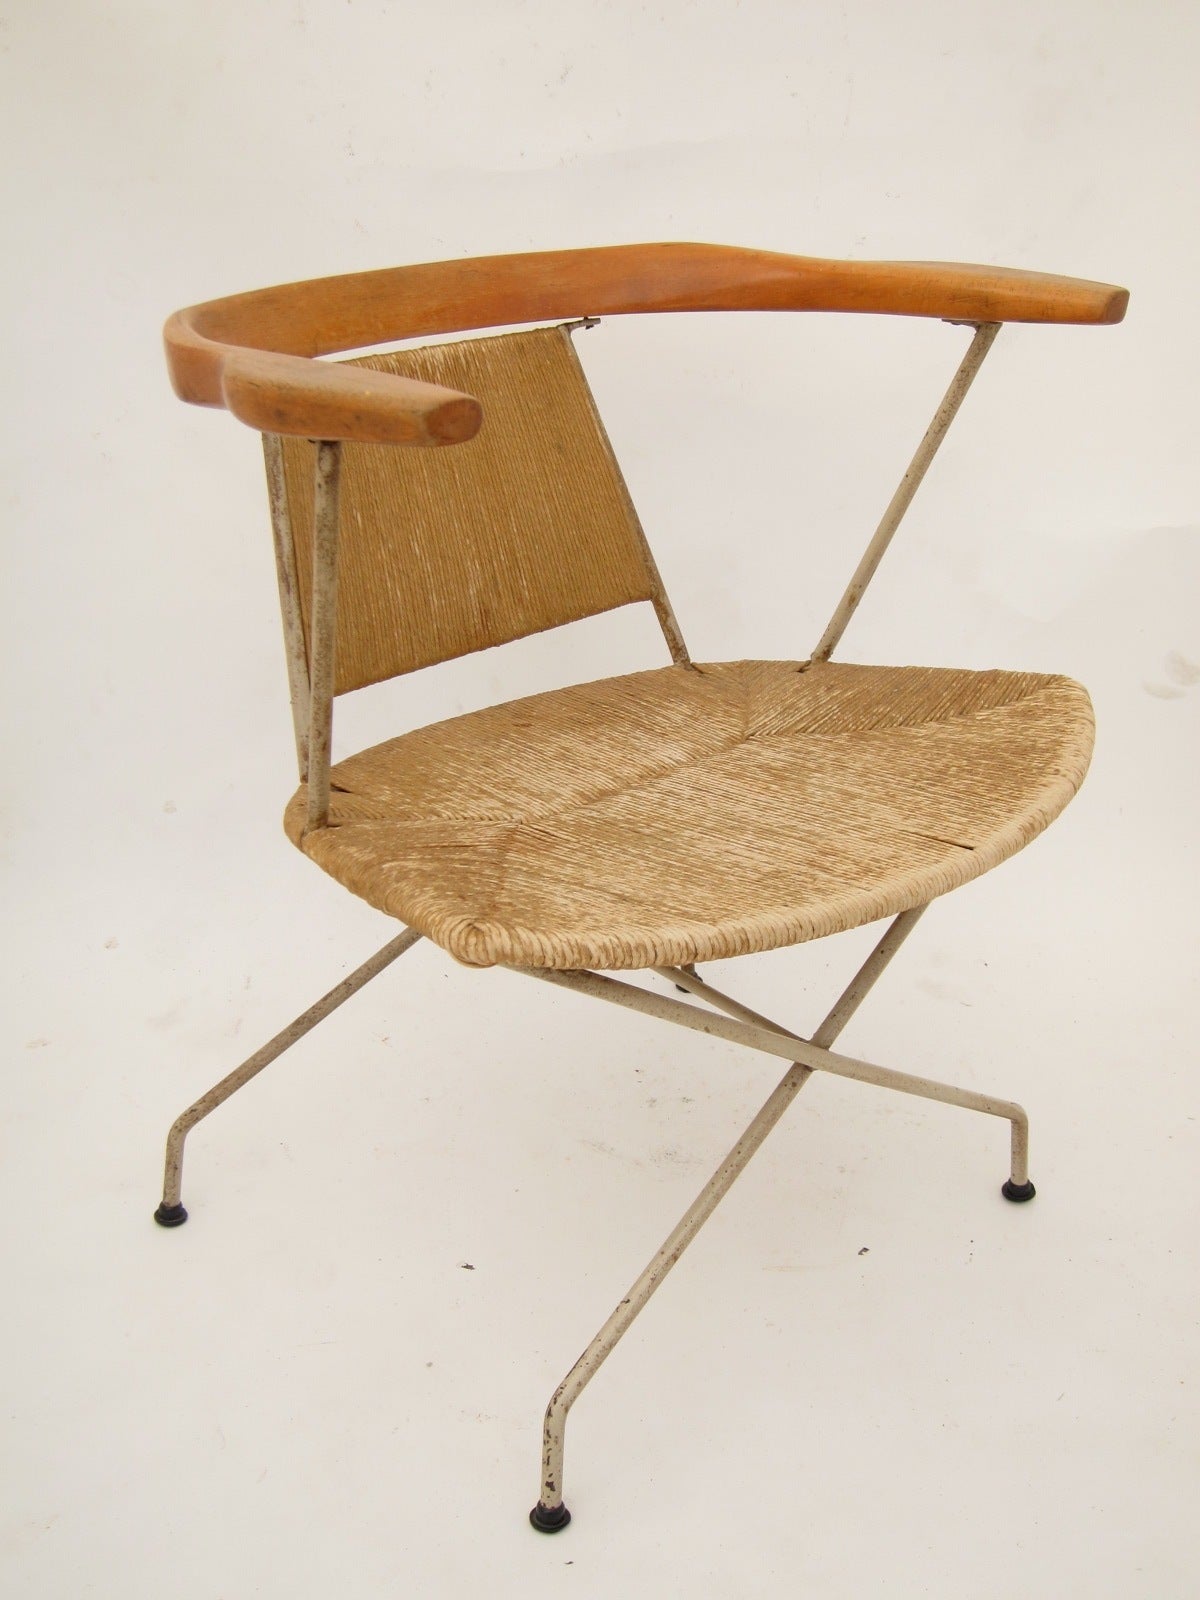 Iron frame arm chair with rope/rush seat and sculpted wood back and arms. 
Designed by Arthur Umanoff for Raymor.